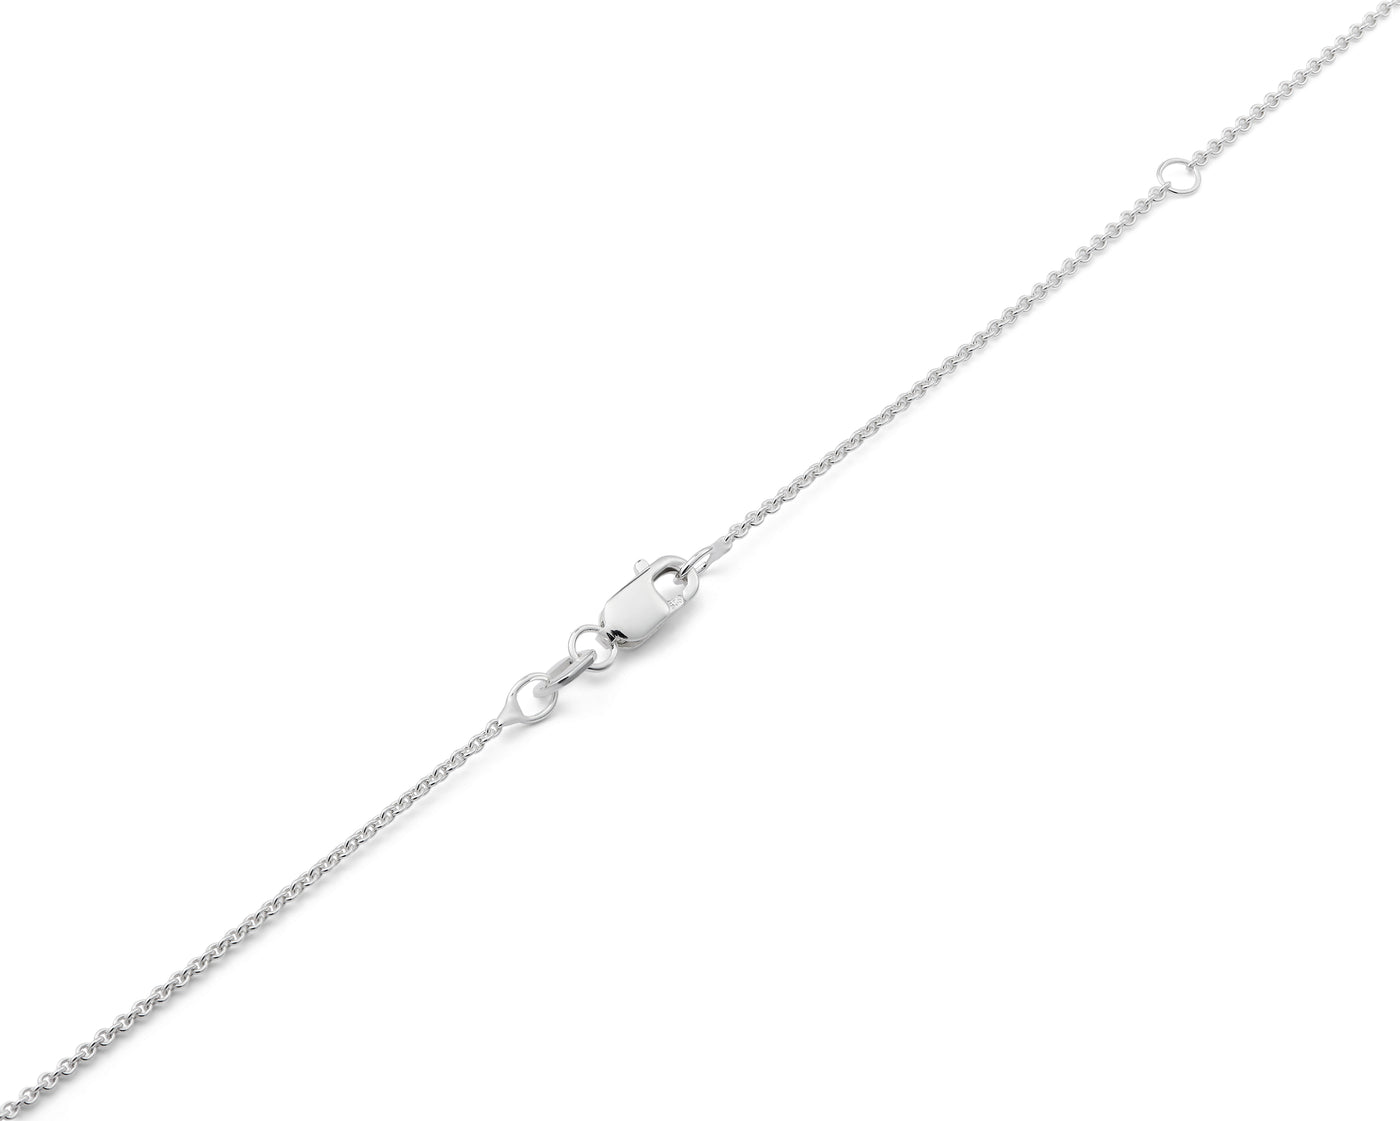 rectangle necklace with diamonds le 3.4g